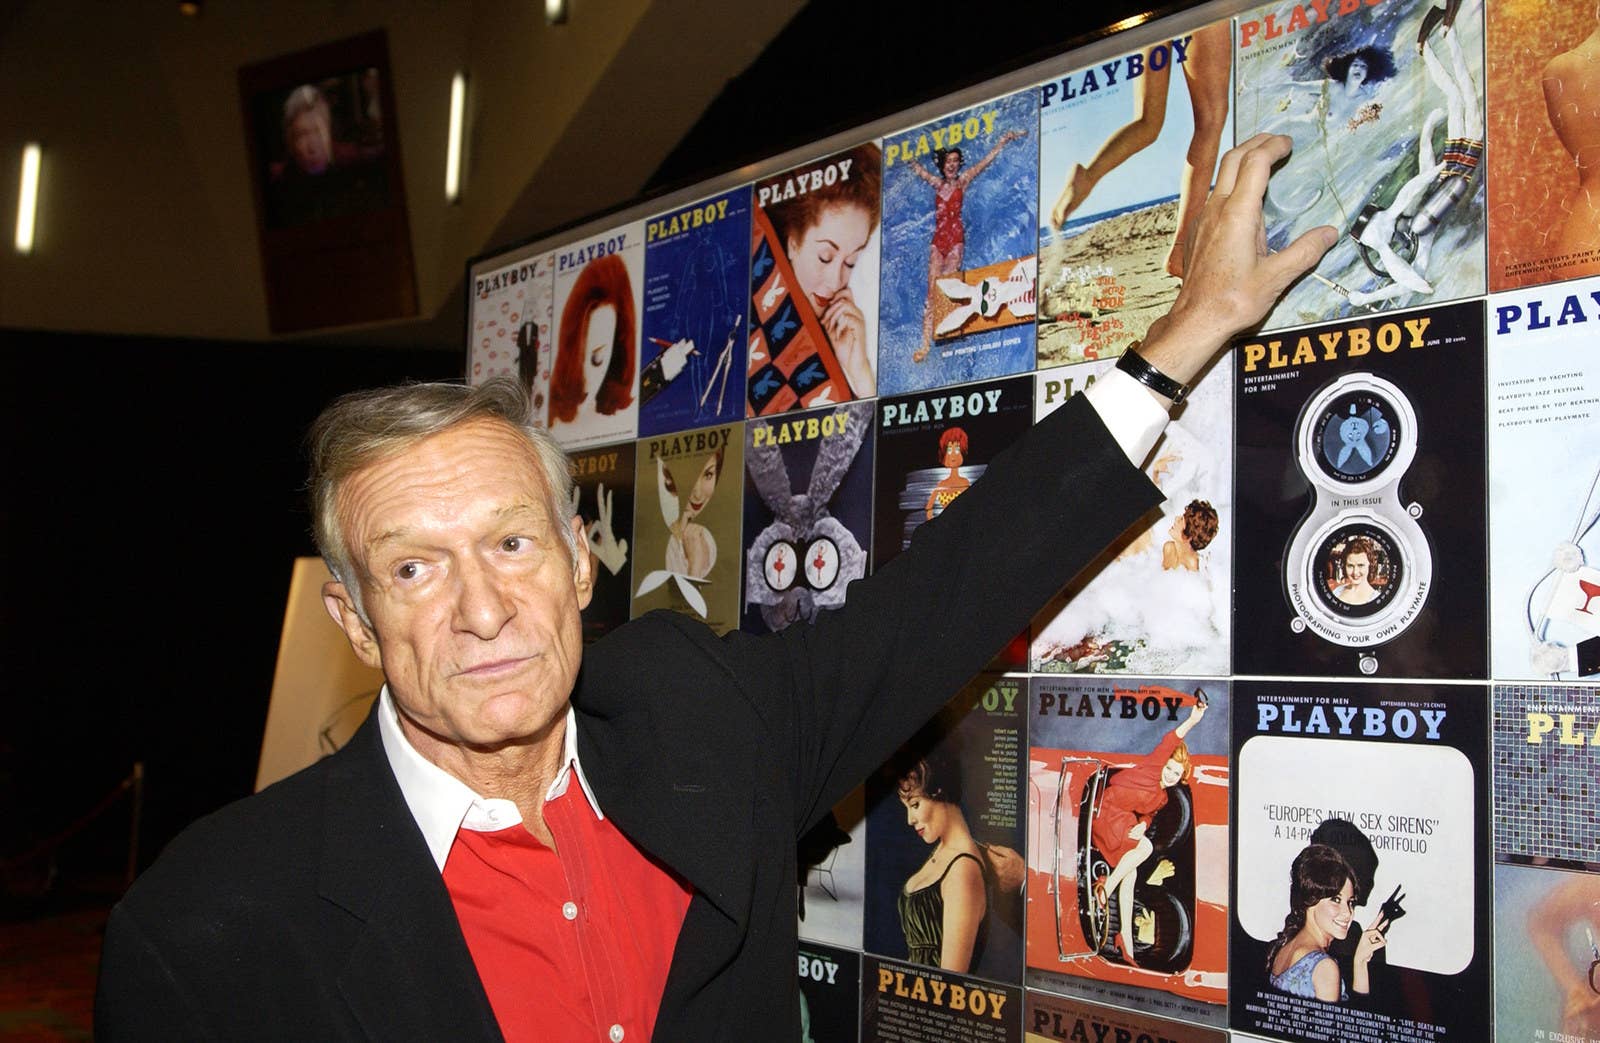 Hefner looks at past Playboy covers during a Las Vegas party celebrating Playboy's 50th anniversary in 2009.